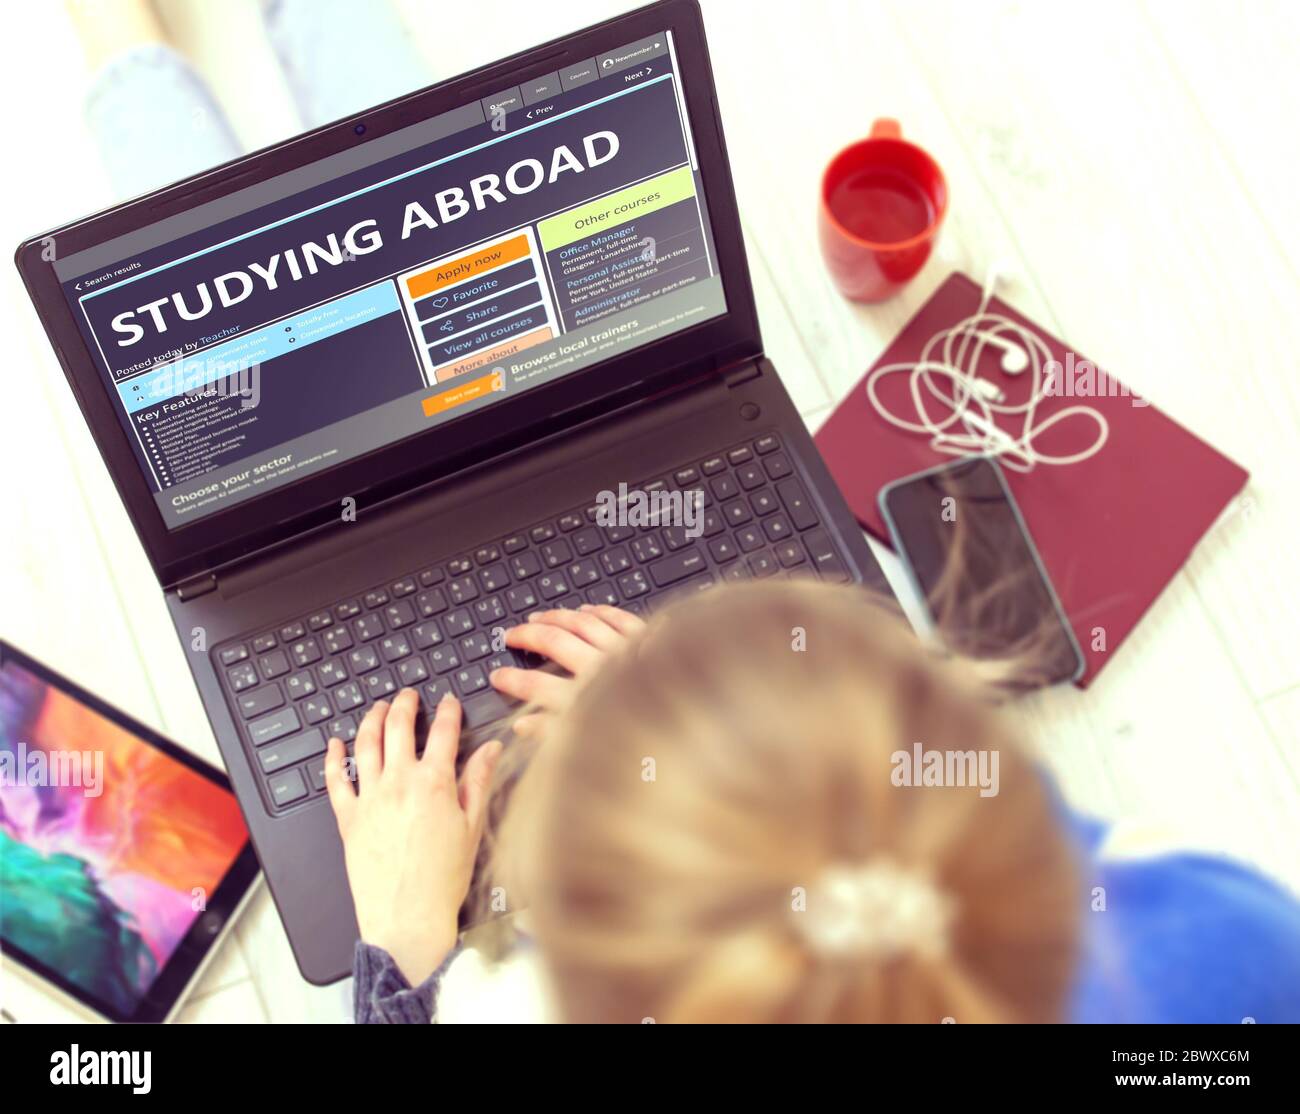 Studying Abroad. Close-up Of Young Woman Using Laptop on the Floor. Continuing Education Concept. Stock Photo